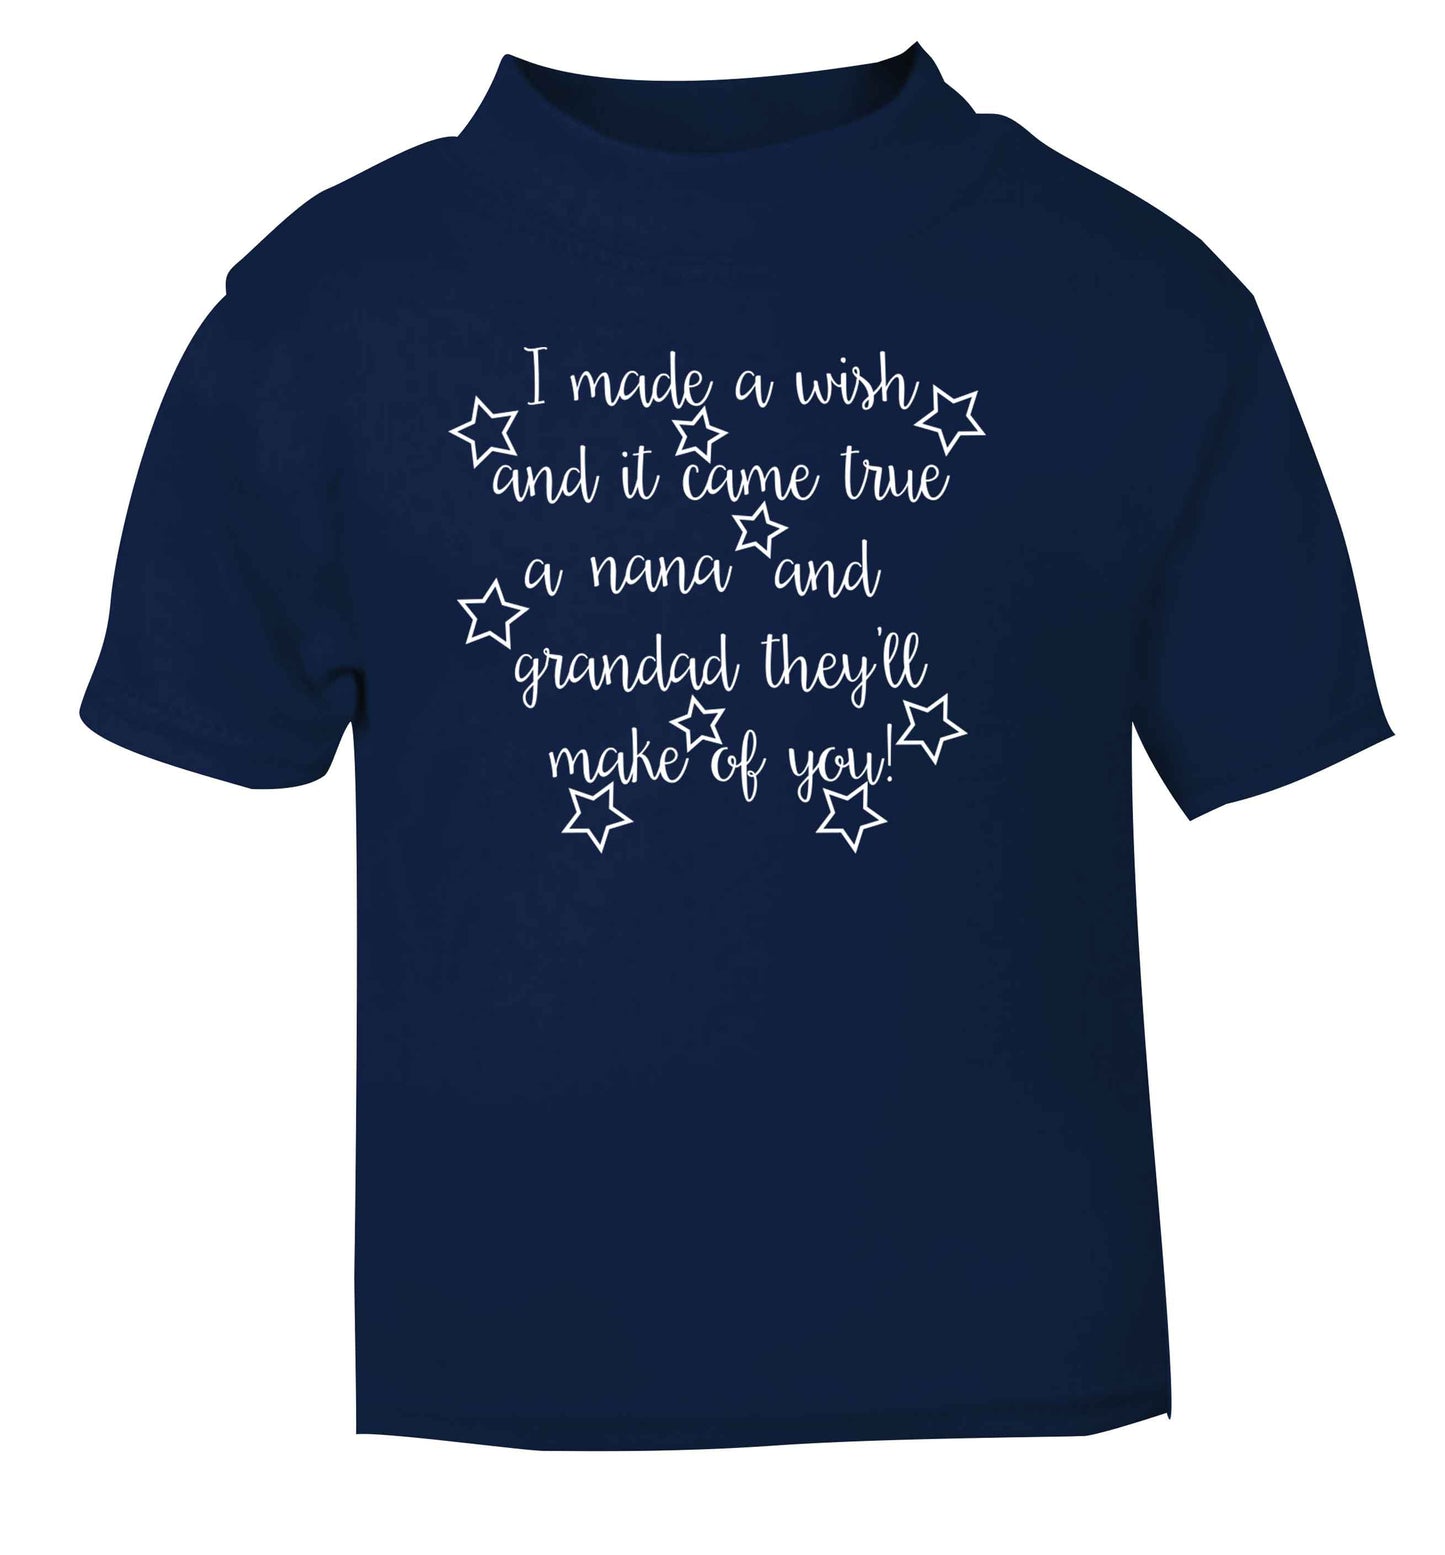 I made a wish and it came true a nana and grandad they'll make of you! navy Baby Toddler Tshirt 2 Years